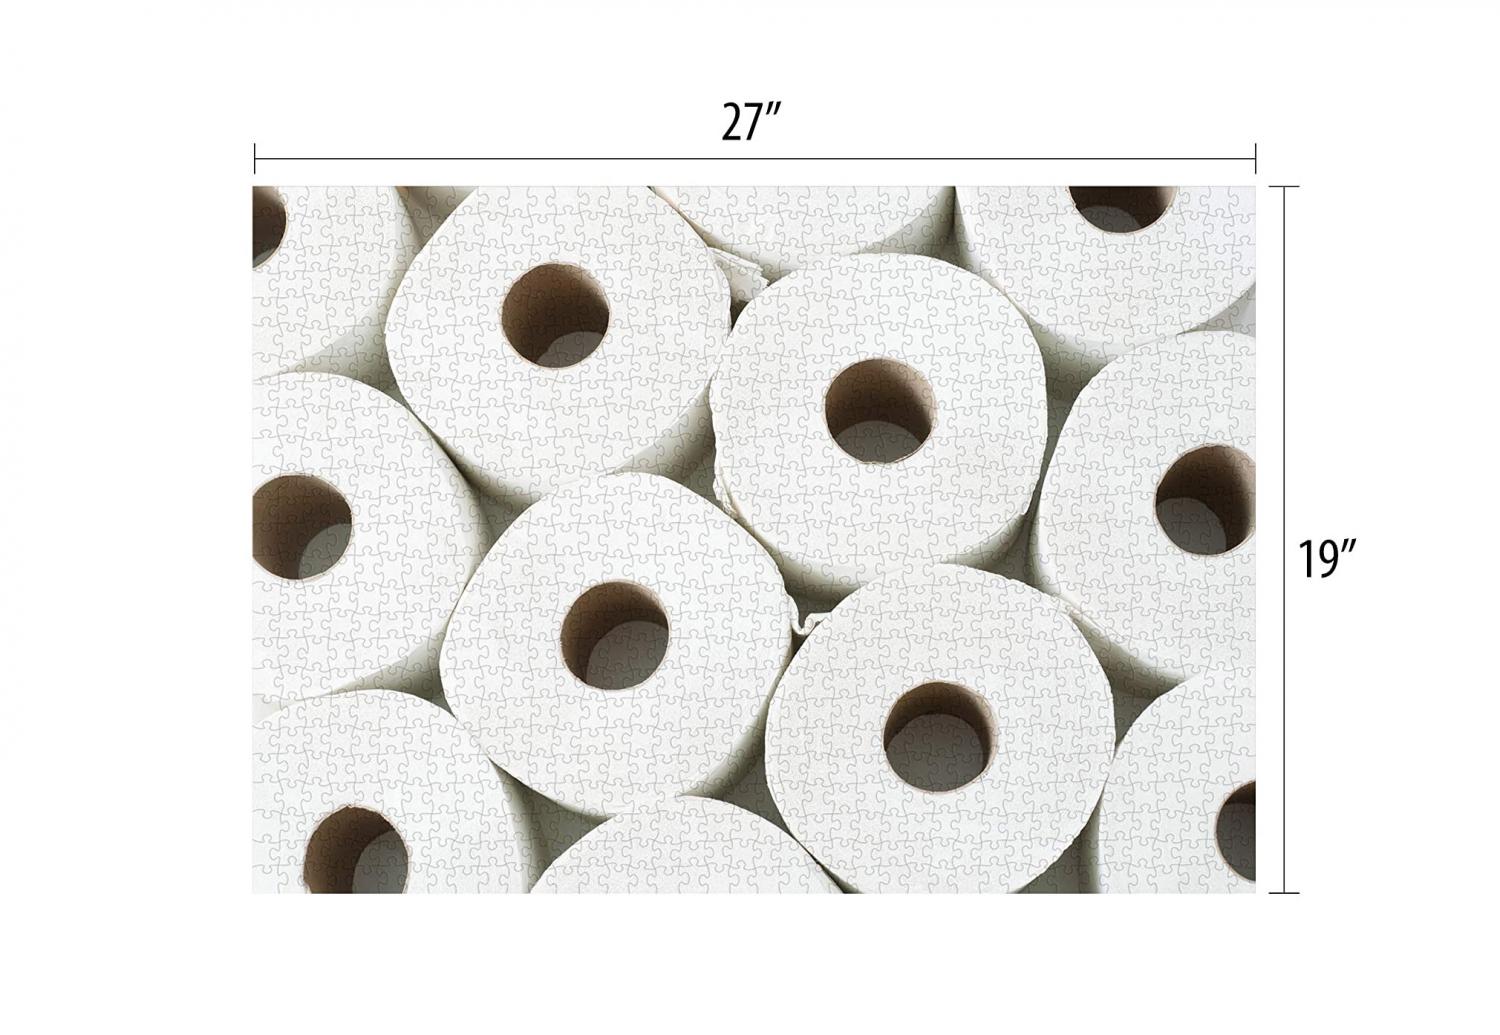 Toilet Paper Jigsaw Puzzle - Funny Quarantine pandemic hoarding puzzle